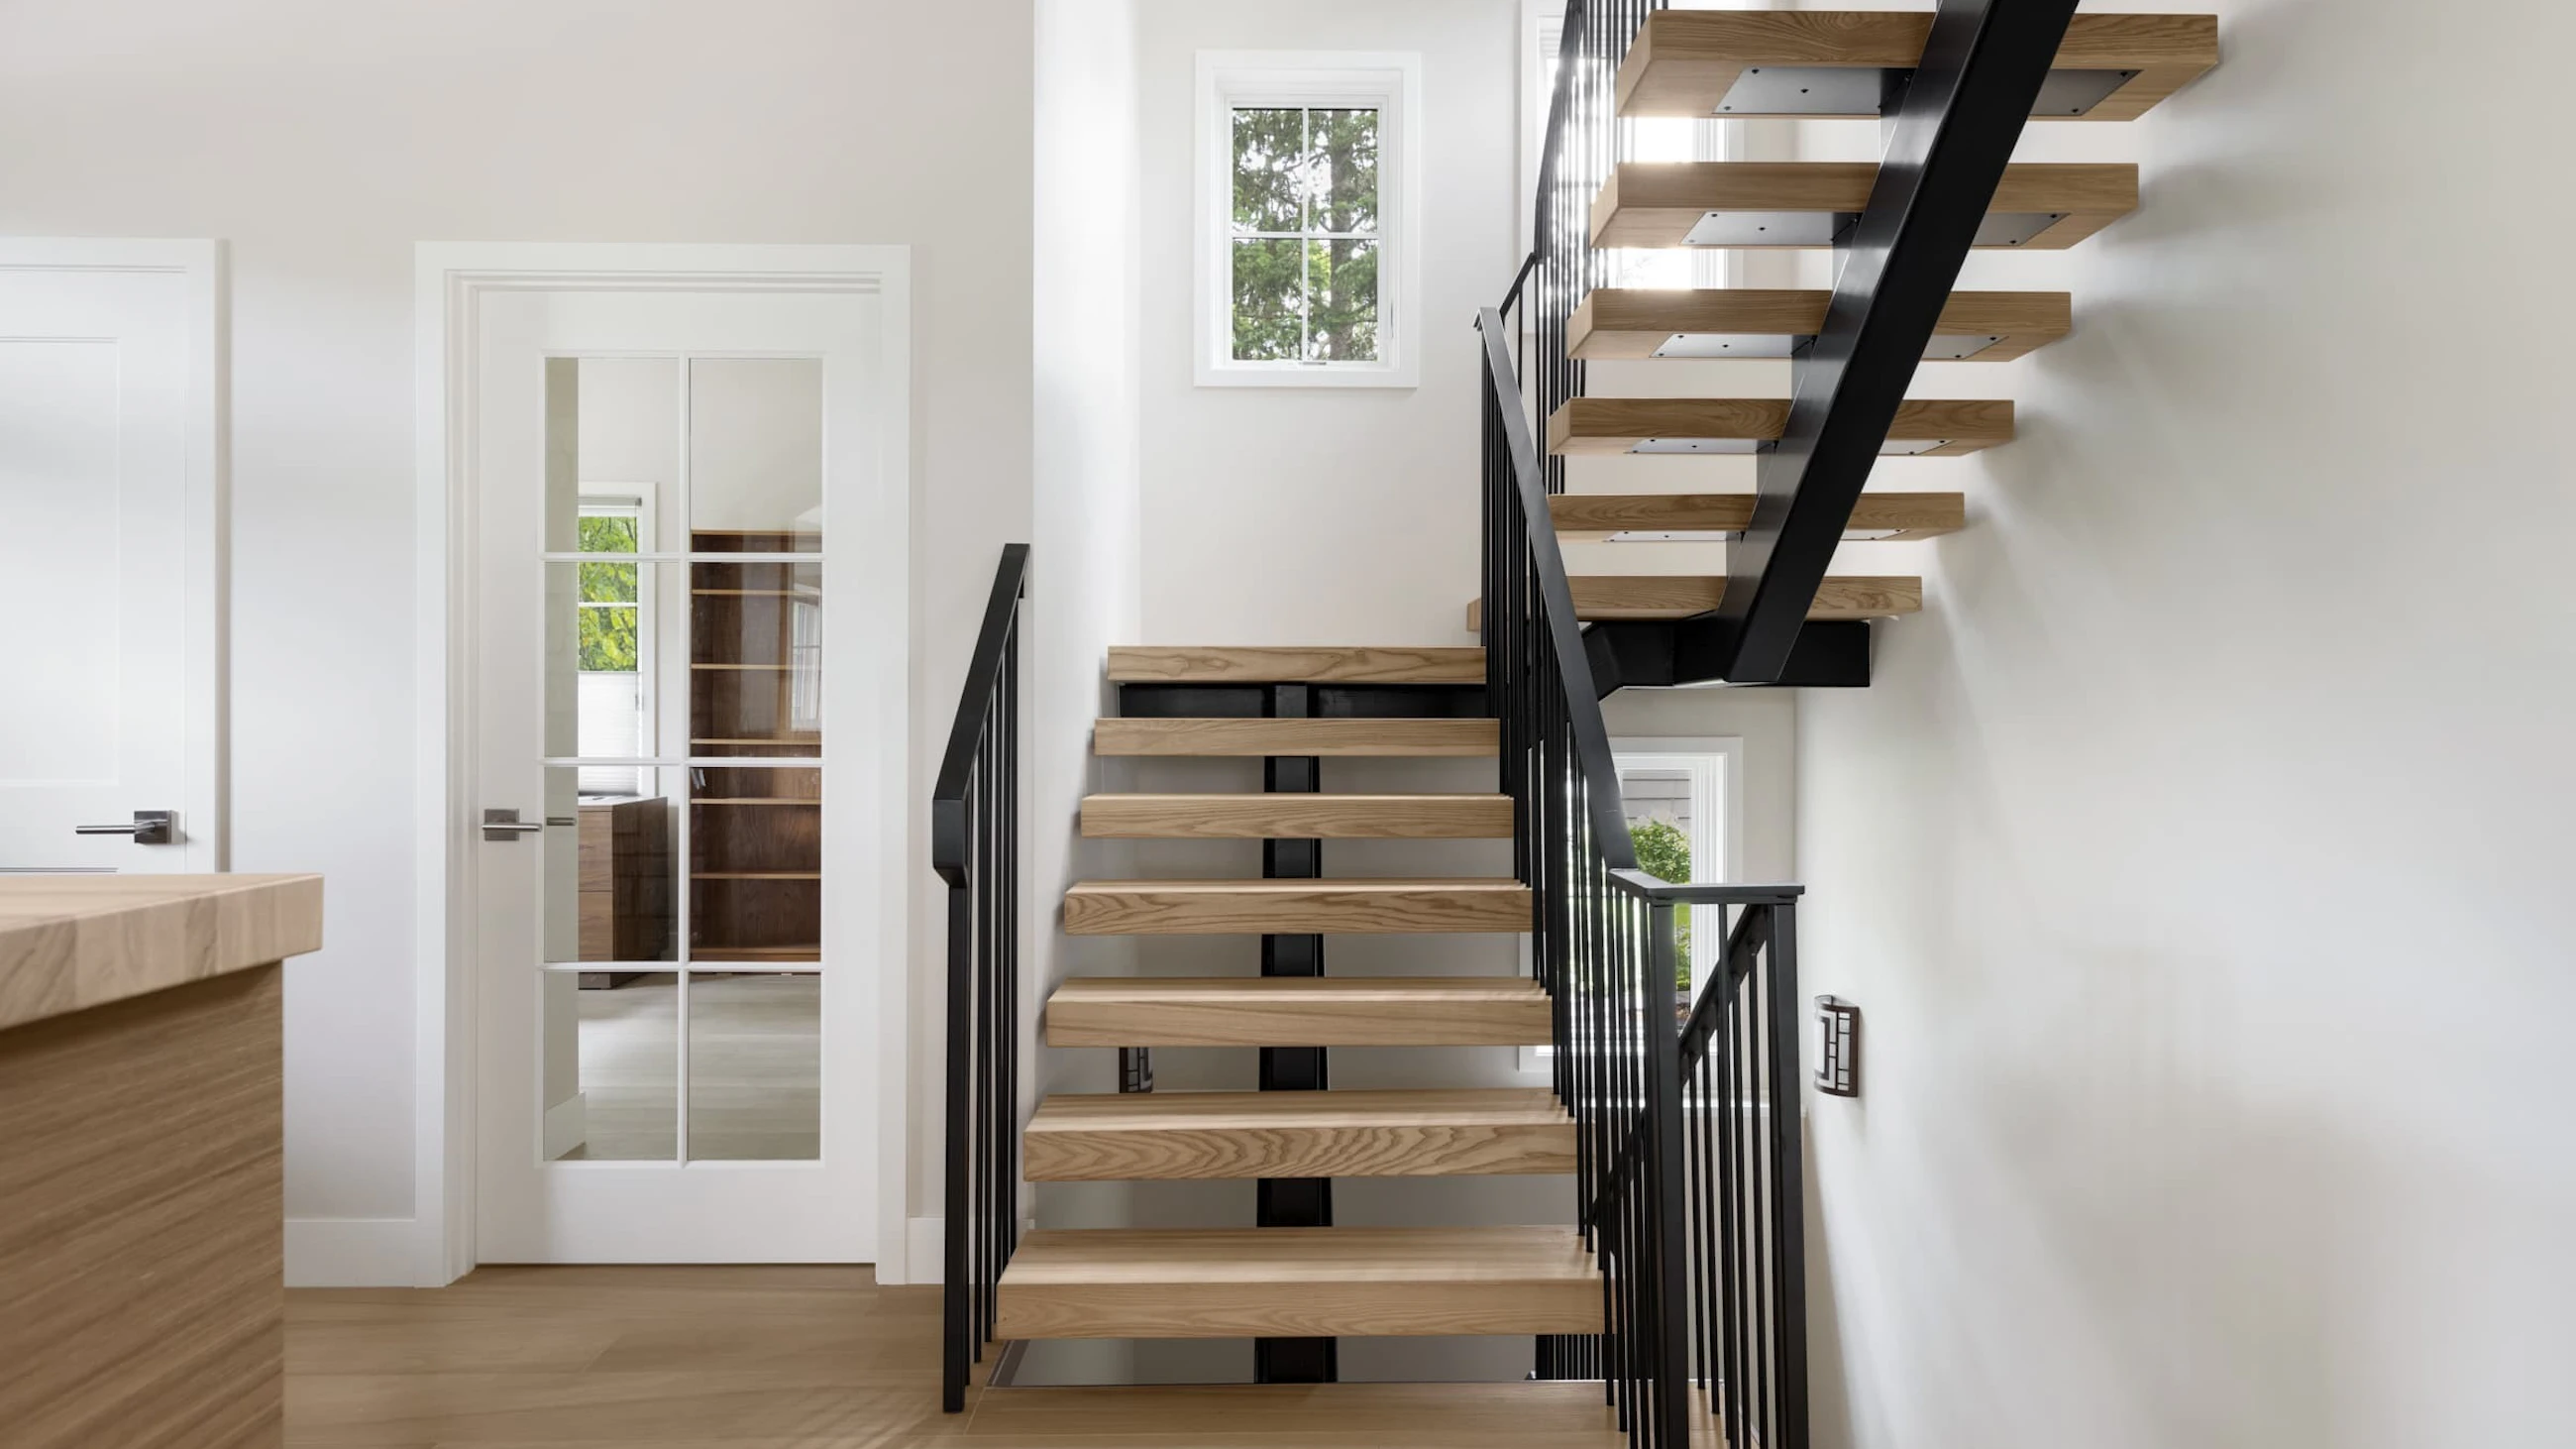 A floating steel staircase with white oak stair treads